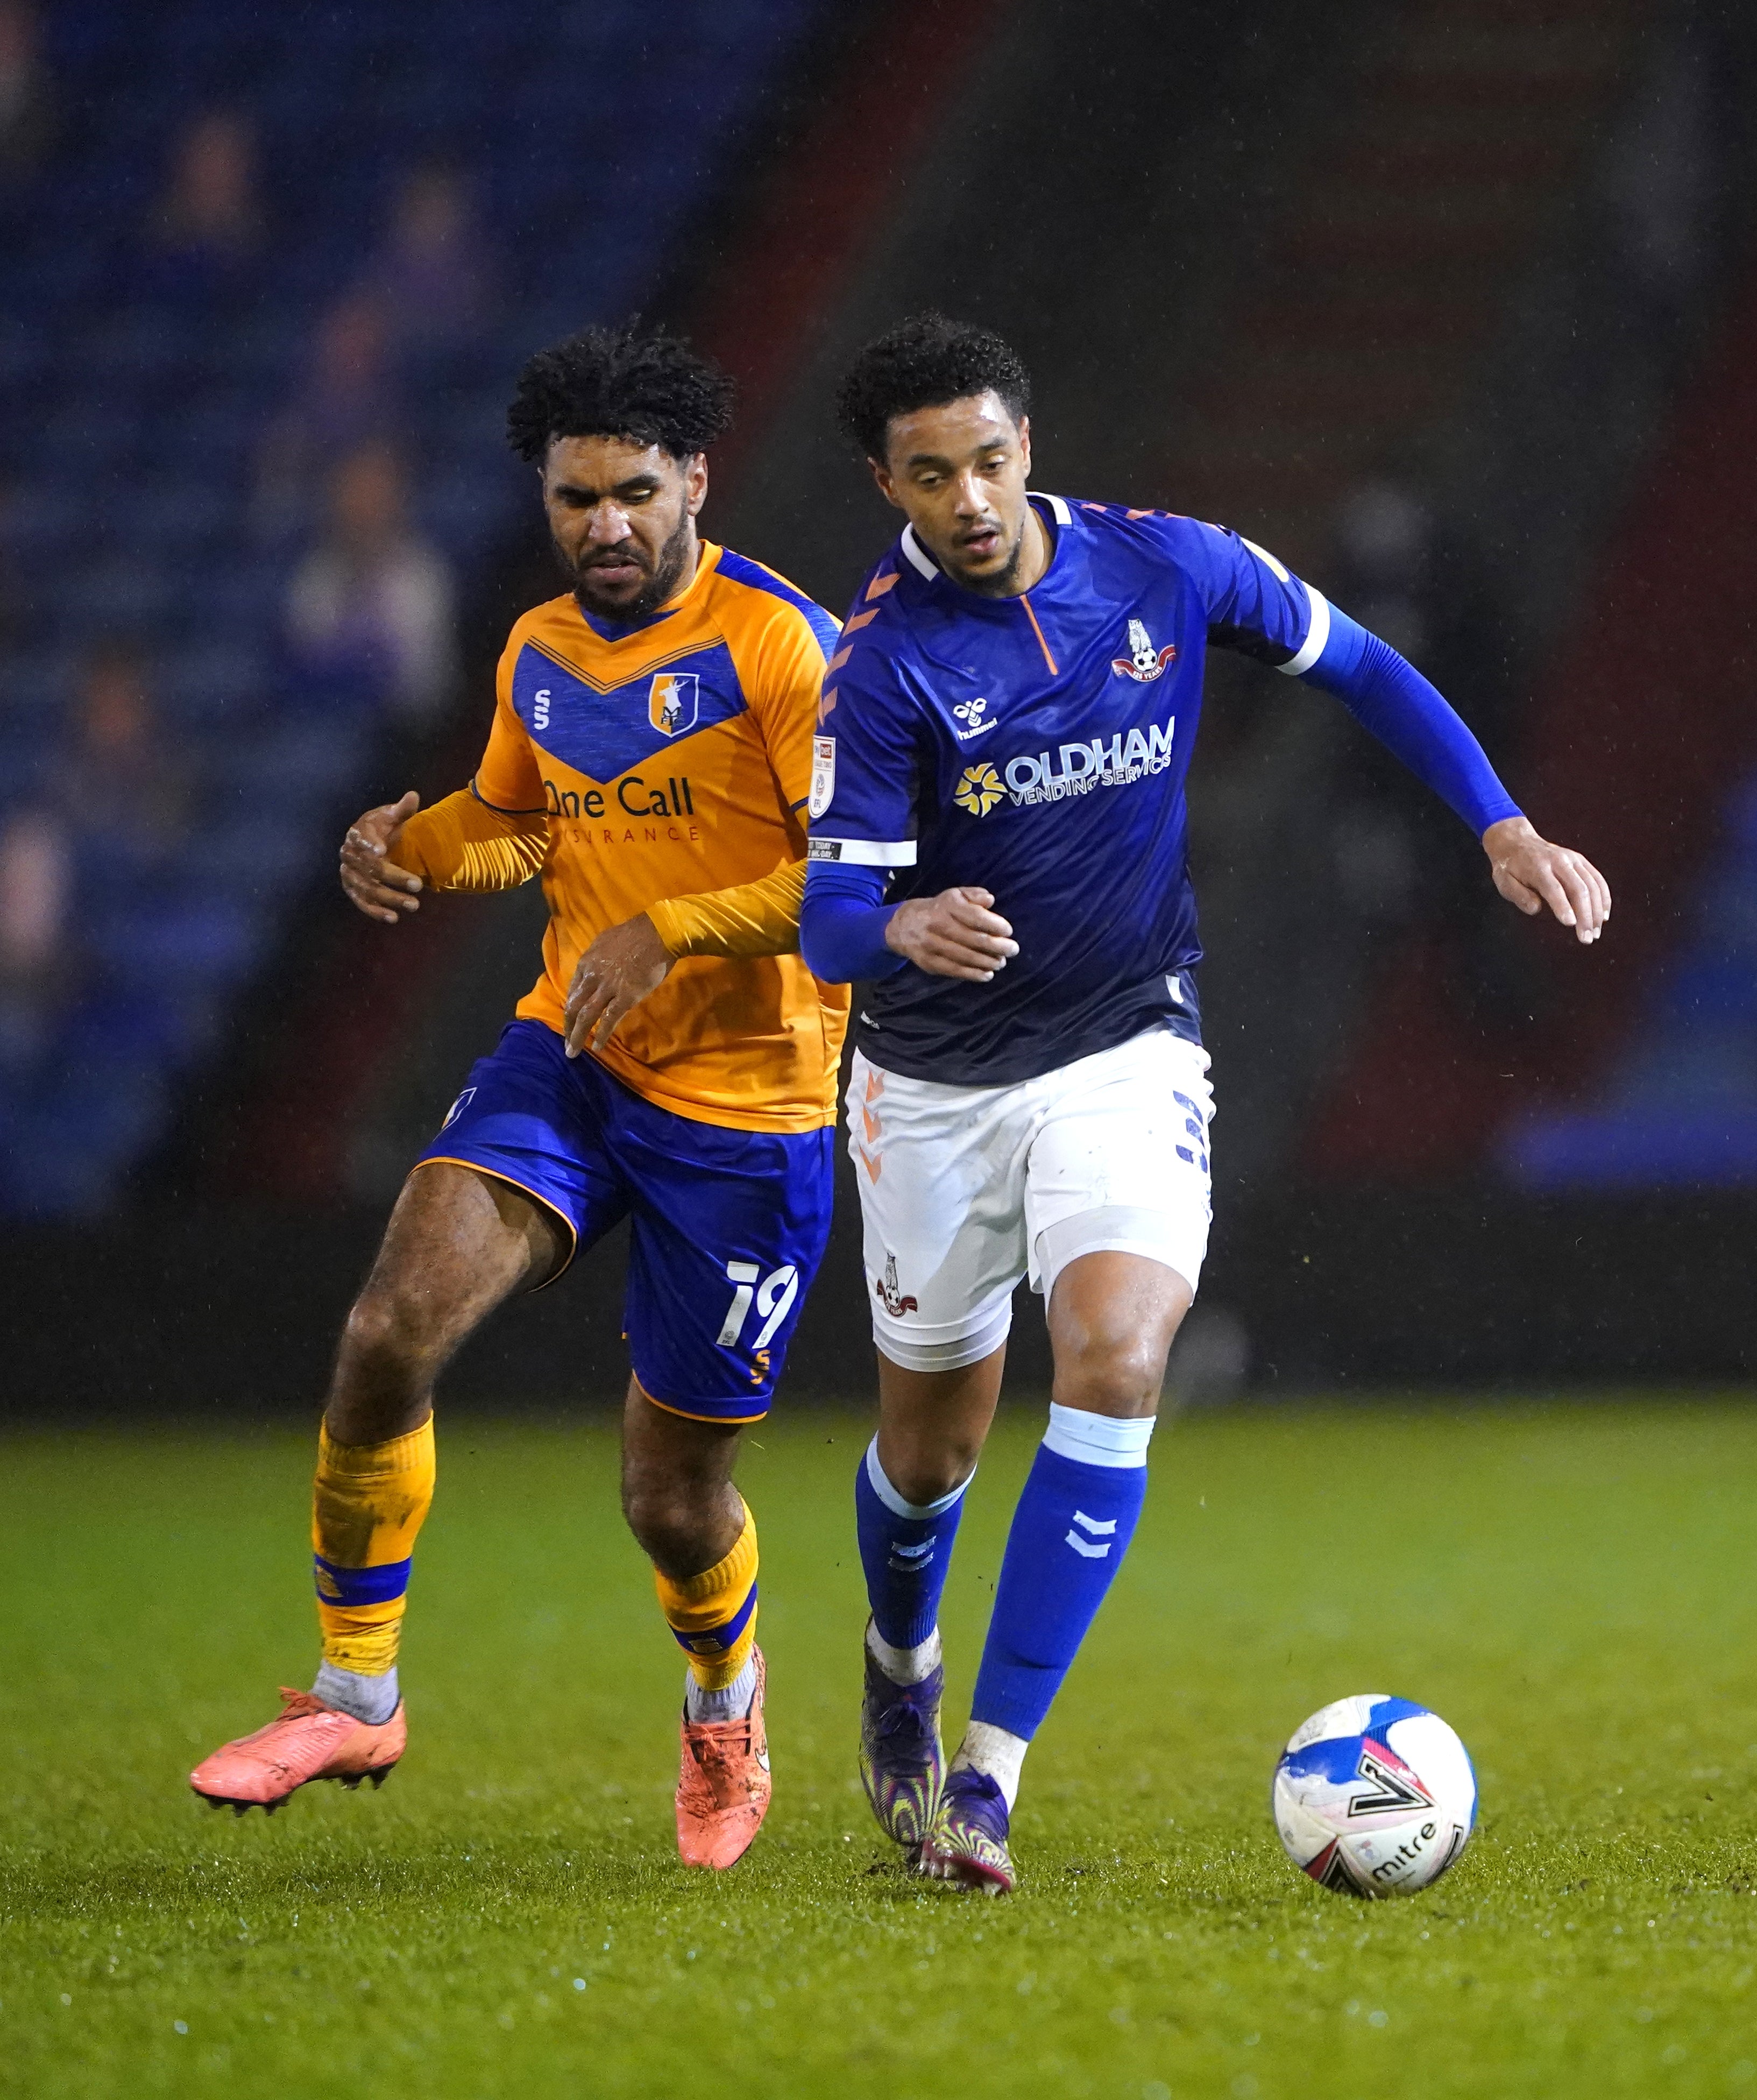 Oldham’s Cameron Borthwick-Jackson (right) will join Burton when his contract expires at the end of the month